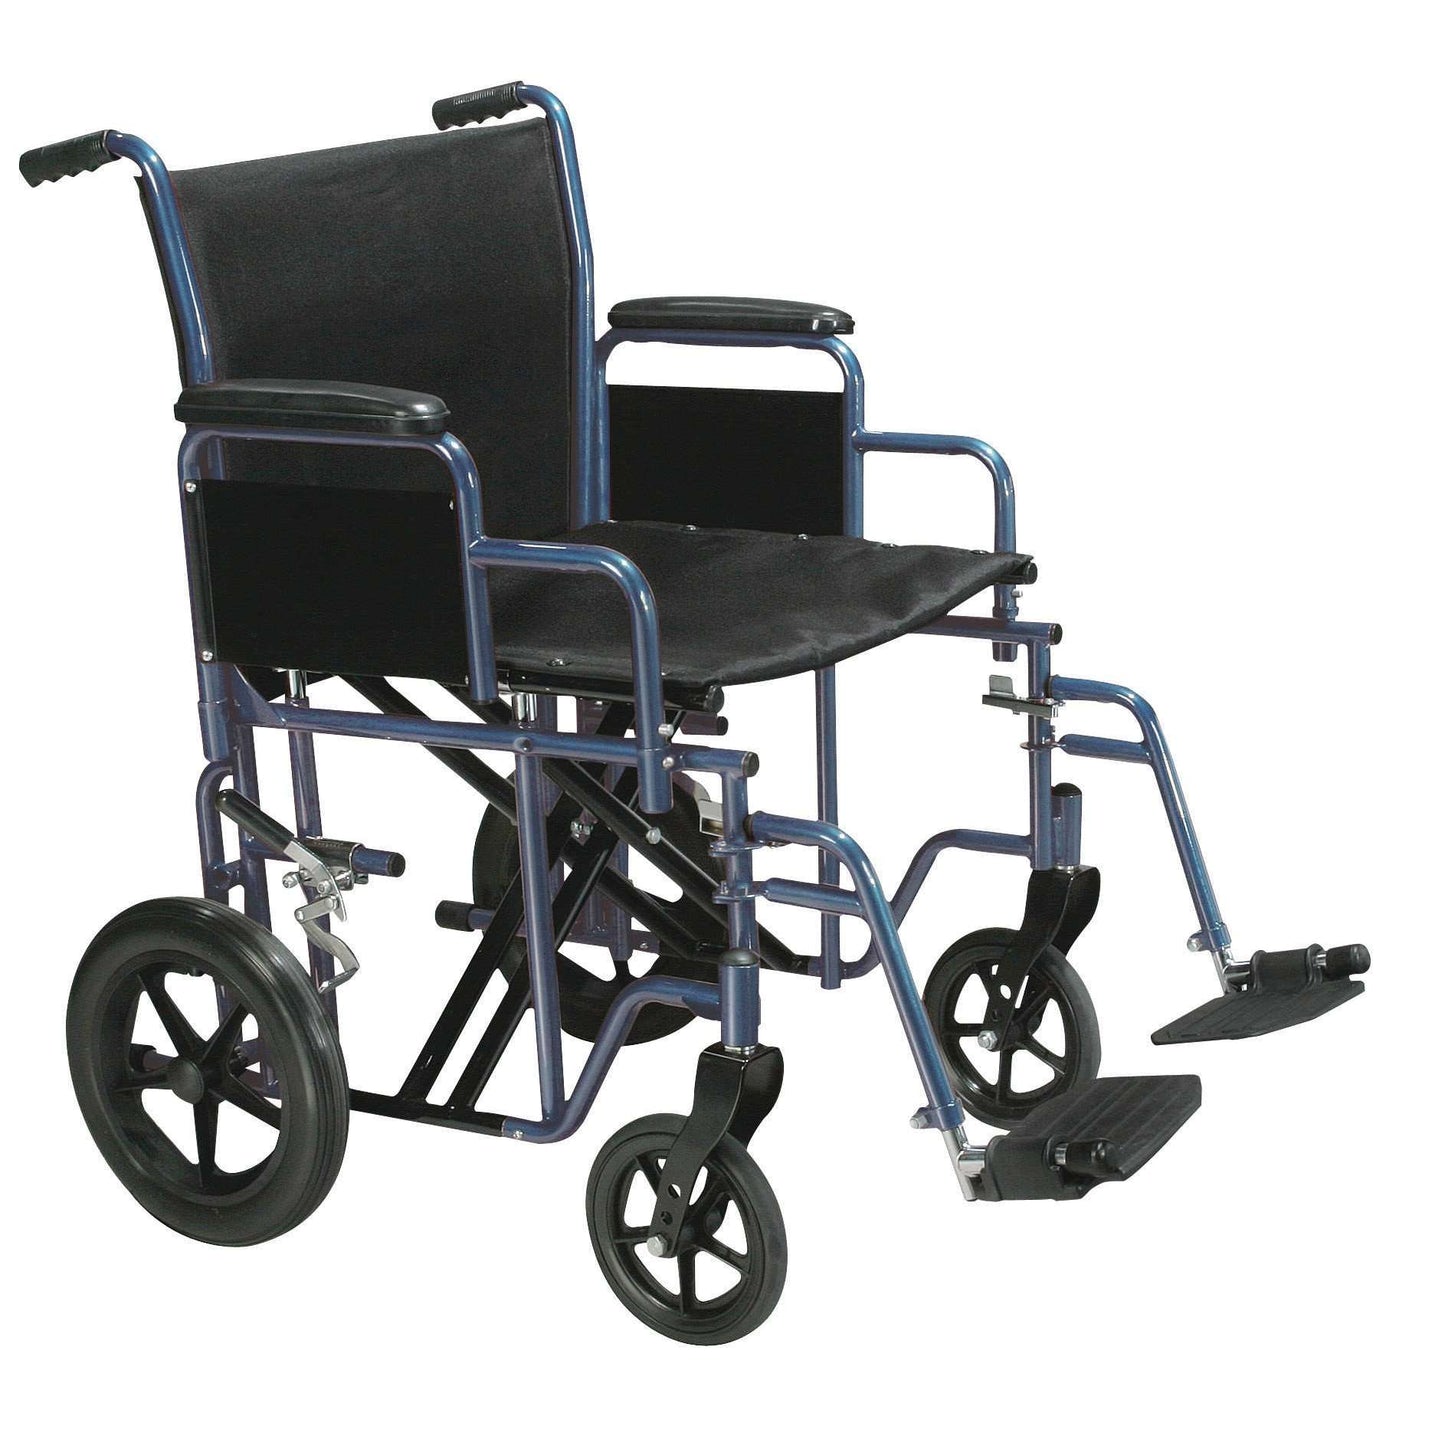 Drive btr20-b Bariatric Heavy Duty Transport Wheelchair with Swing Away Footrest, 20" Seat, Blue